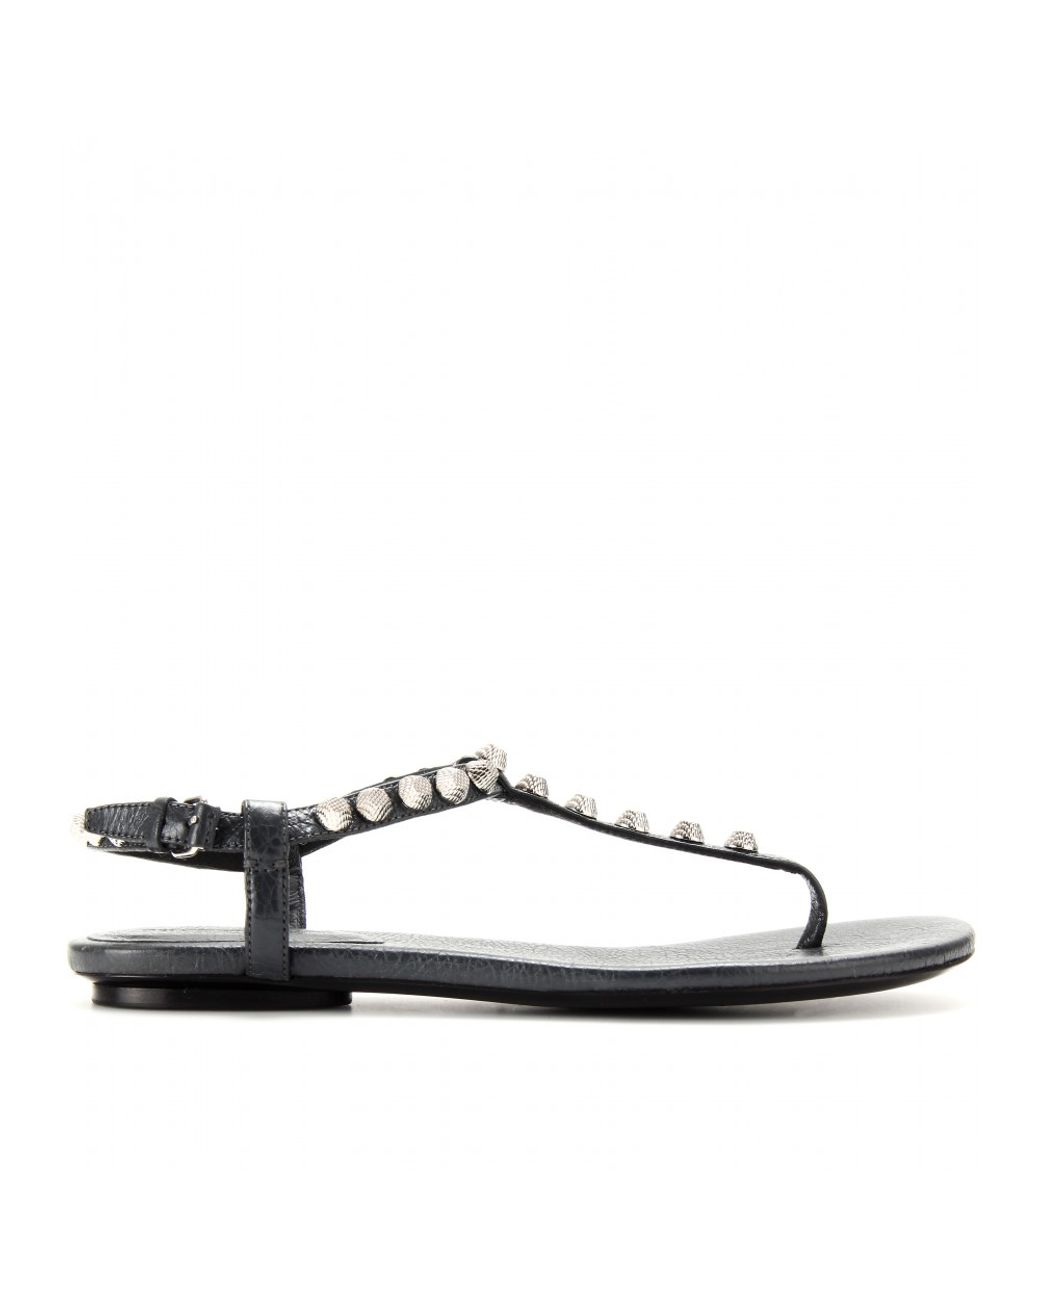 Balenciaga Giant Studded Leather Sandals in Anthracite (Black) | Lyst